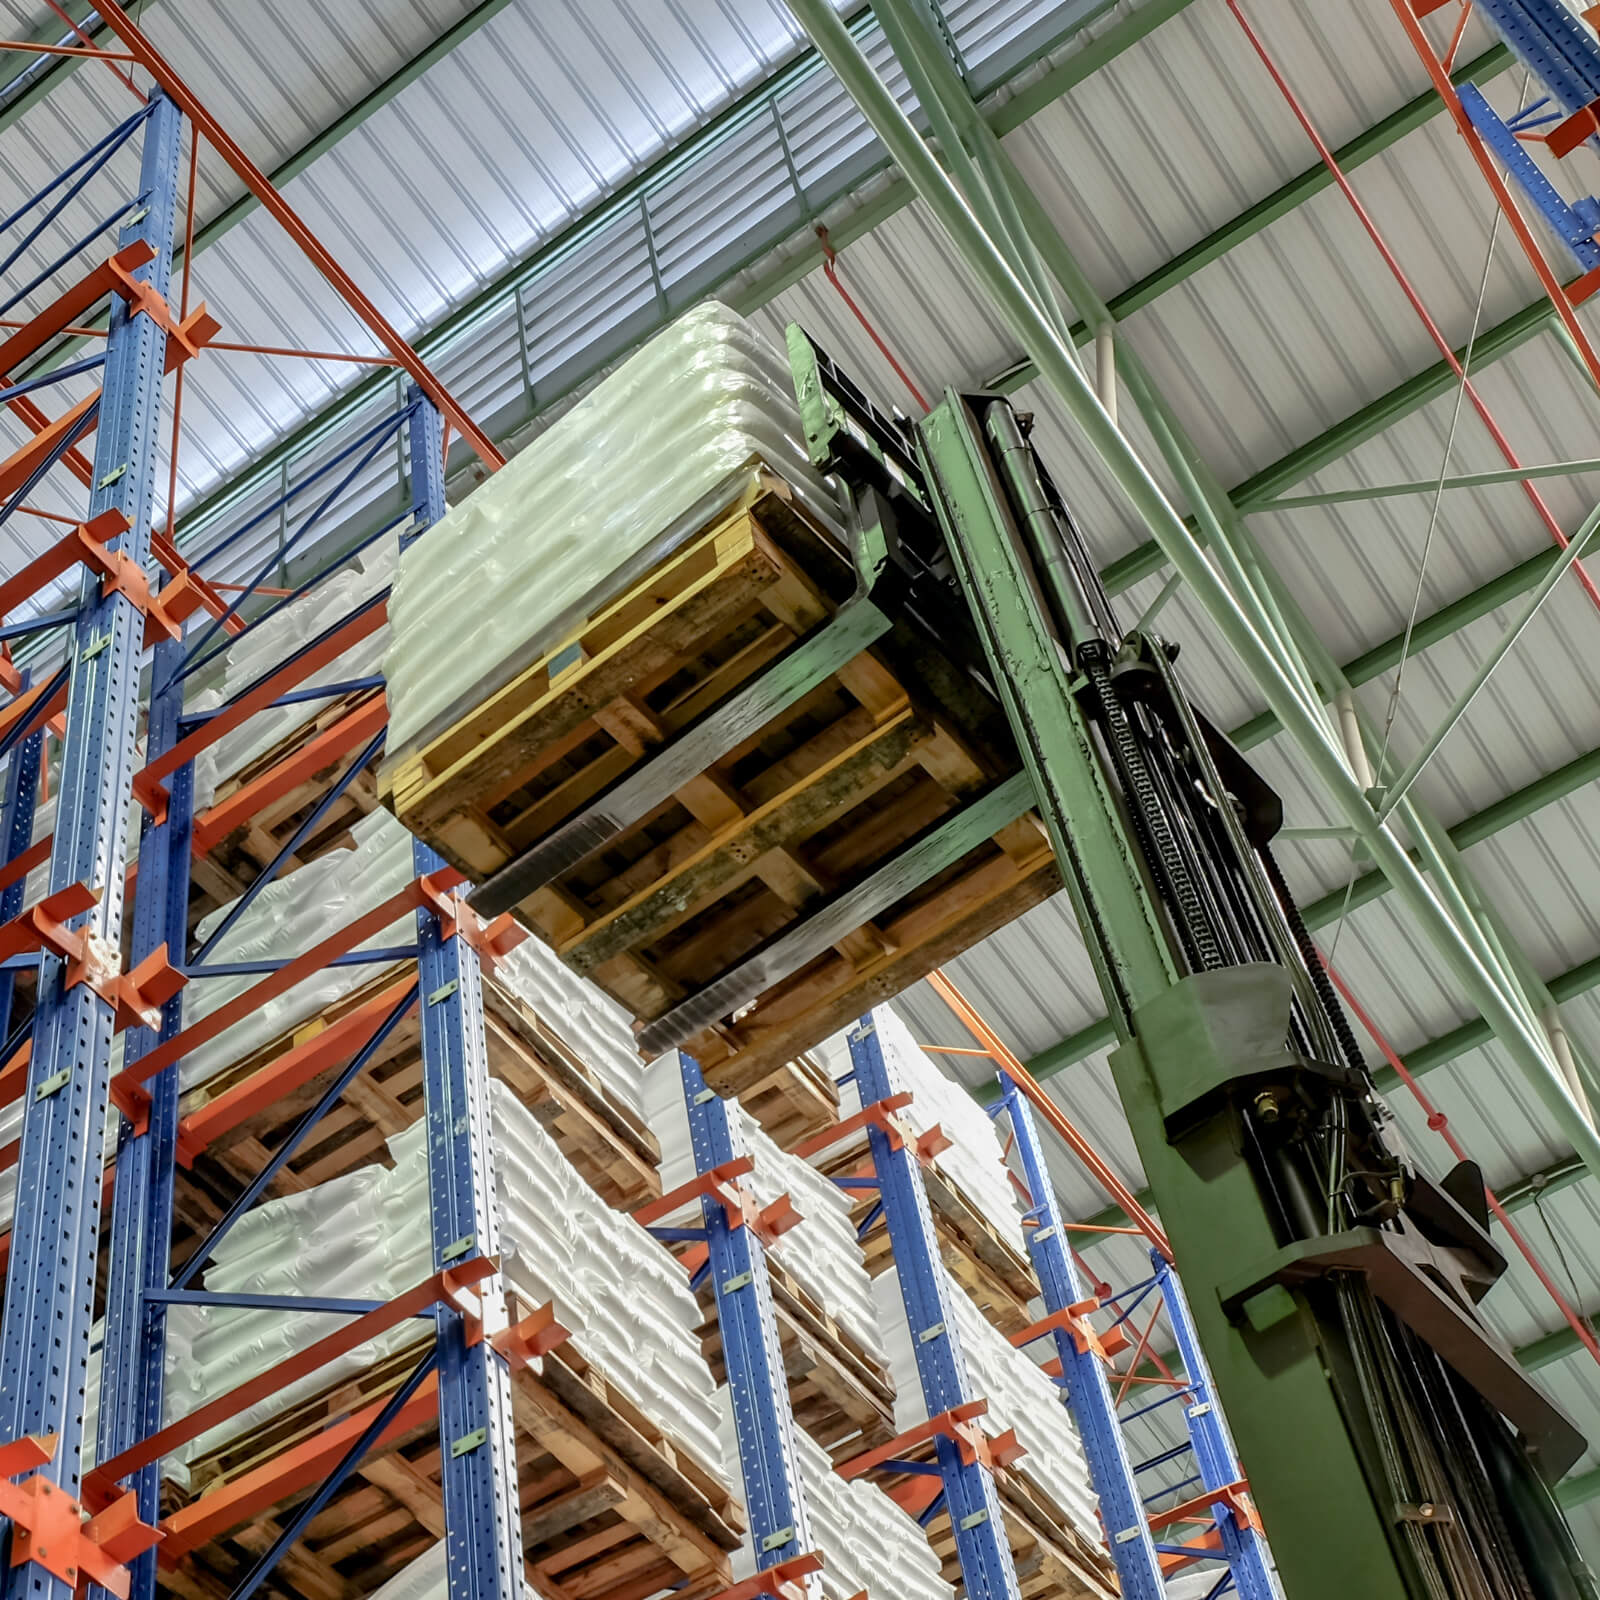 Cargo Material Handling Systems